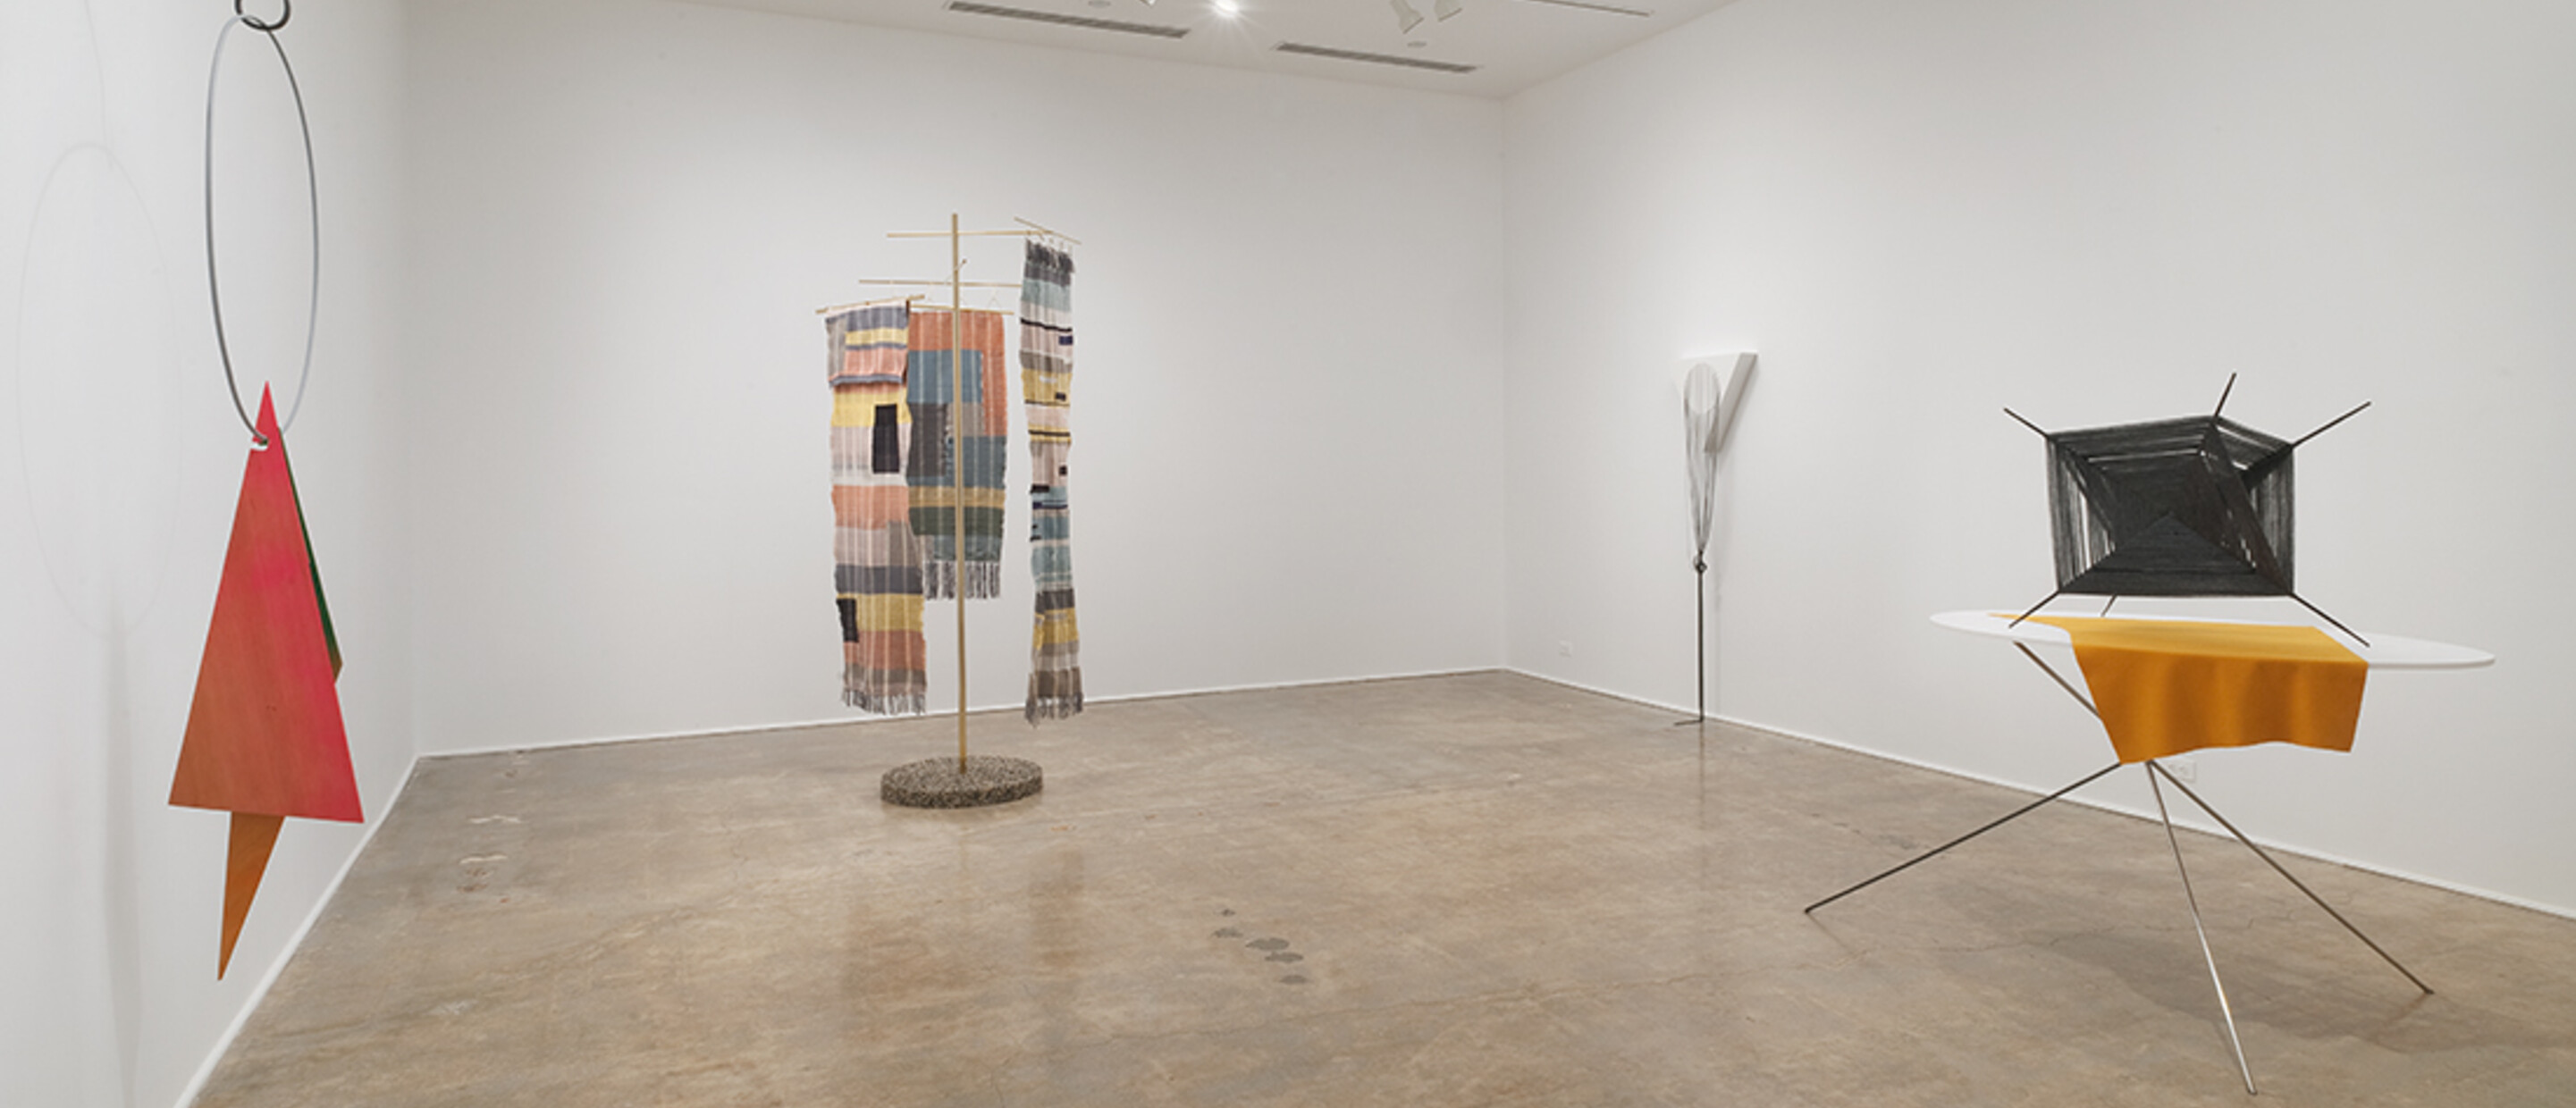 Installation View of Project Series 47: Krysten Cunningham: Ret, Scutch, Heckle at the Pomona College Museum of Art. Photo Credit: Robert Wedemeyer. View 1.